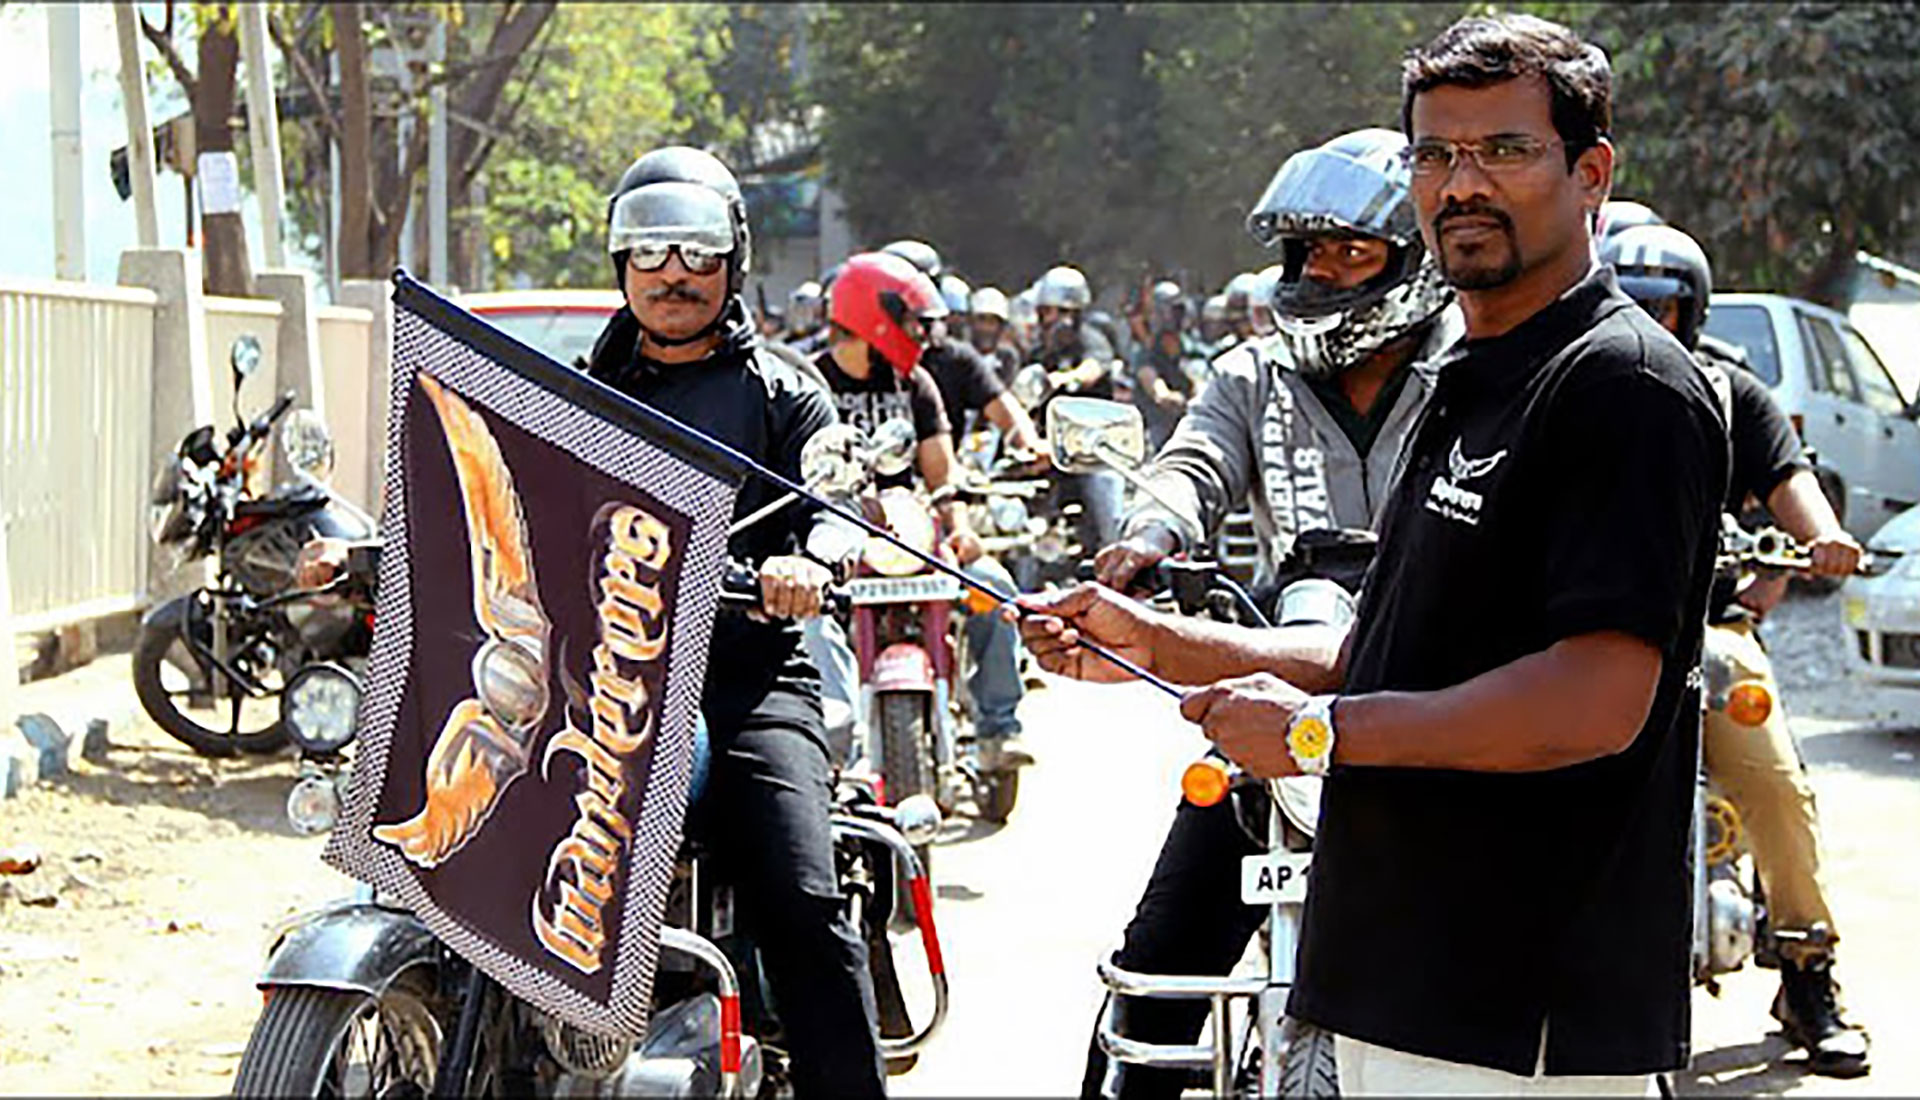 Flagging off Wanderers rally in Hyderabad